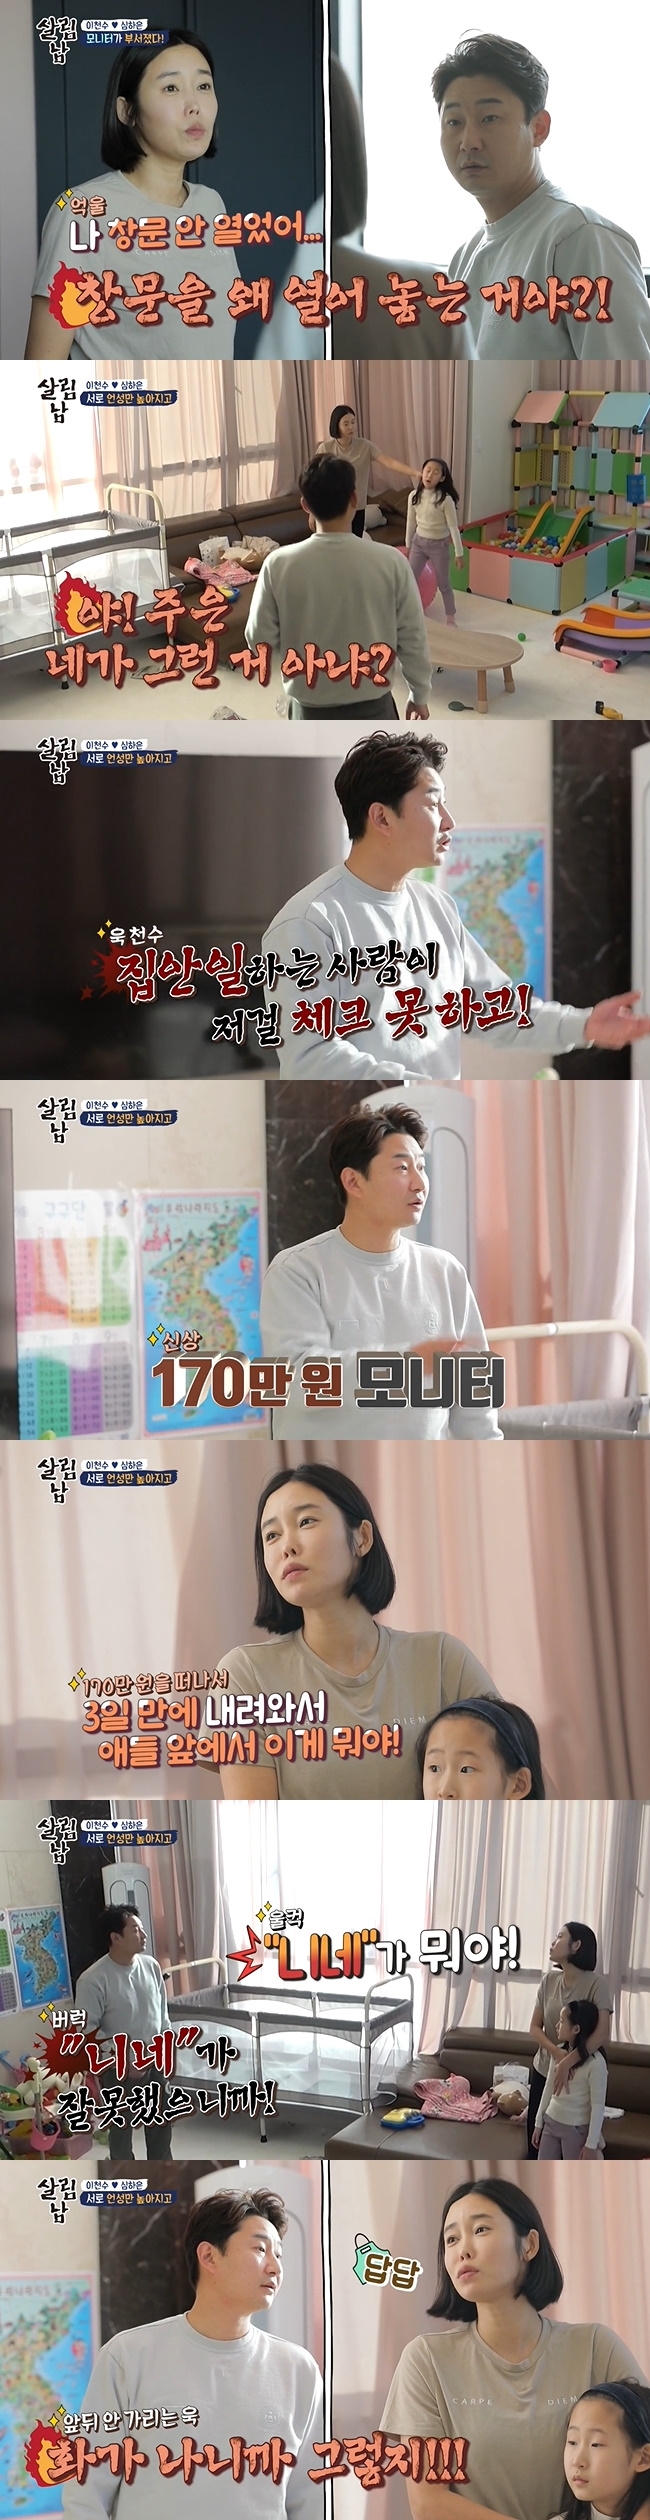 Lee Chun-soo has been in conflict with his family because of his fiery nature.On KBS 2TVs Season 2 of Living Men, which aired on February 19, the daily life of the Lee Chun-soo family was revealed.Lee Chun-soo, who had been pissed off by her daughter and spent three days alone in a second-floor room, went into a computer room and then burst out.The new monitor of 1.7 million won, which was never used because of the wind blowing open window, fell to the floor and broke.Lee Chun-soo asked his wife, Shim Ha-eun, who was surprised by the shouting, Why did you open the door without cleaning? Shim Ha-eun said, How do I know?I dont even come in here, he said.When Lee Chun-soo said, You should take care of the house, Shim Ha-eun became increasingly vocal as he confronted If the door is open, it is your responsibility to close the door.Lee Chun-soo said, I work outside, and Shim Ha-eun avoided the position because he was afraid that he would blow me up and live.But Lee Chun-soo, who came down to the first floor without getting angry, even questioned her daughter. Lee Chun-soo told her wife, What are you doing with a housework child?Whats a house worker doing that without checking it? Whats that cost, but it costs 1.7 million won for a monitor? he said angrily.Shim Ha-eun pointed out that I came down in three days and what is it in front of the children?Lee Chun-soo went up to the second floor with an angry cry, What am I saying because you are wrong?